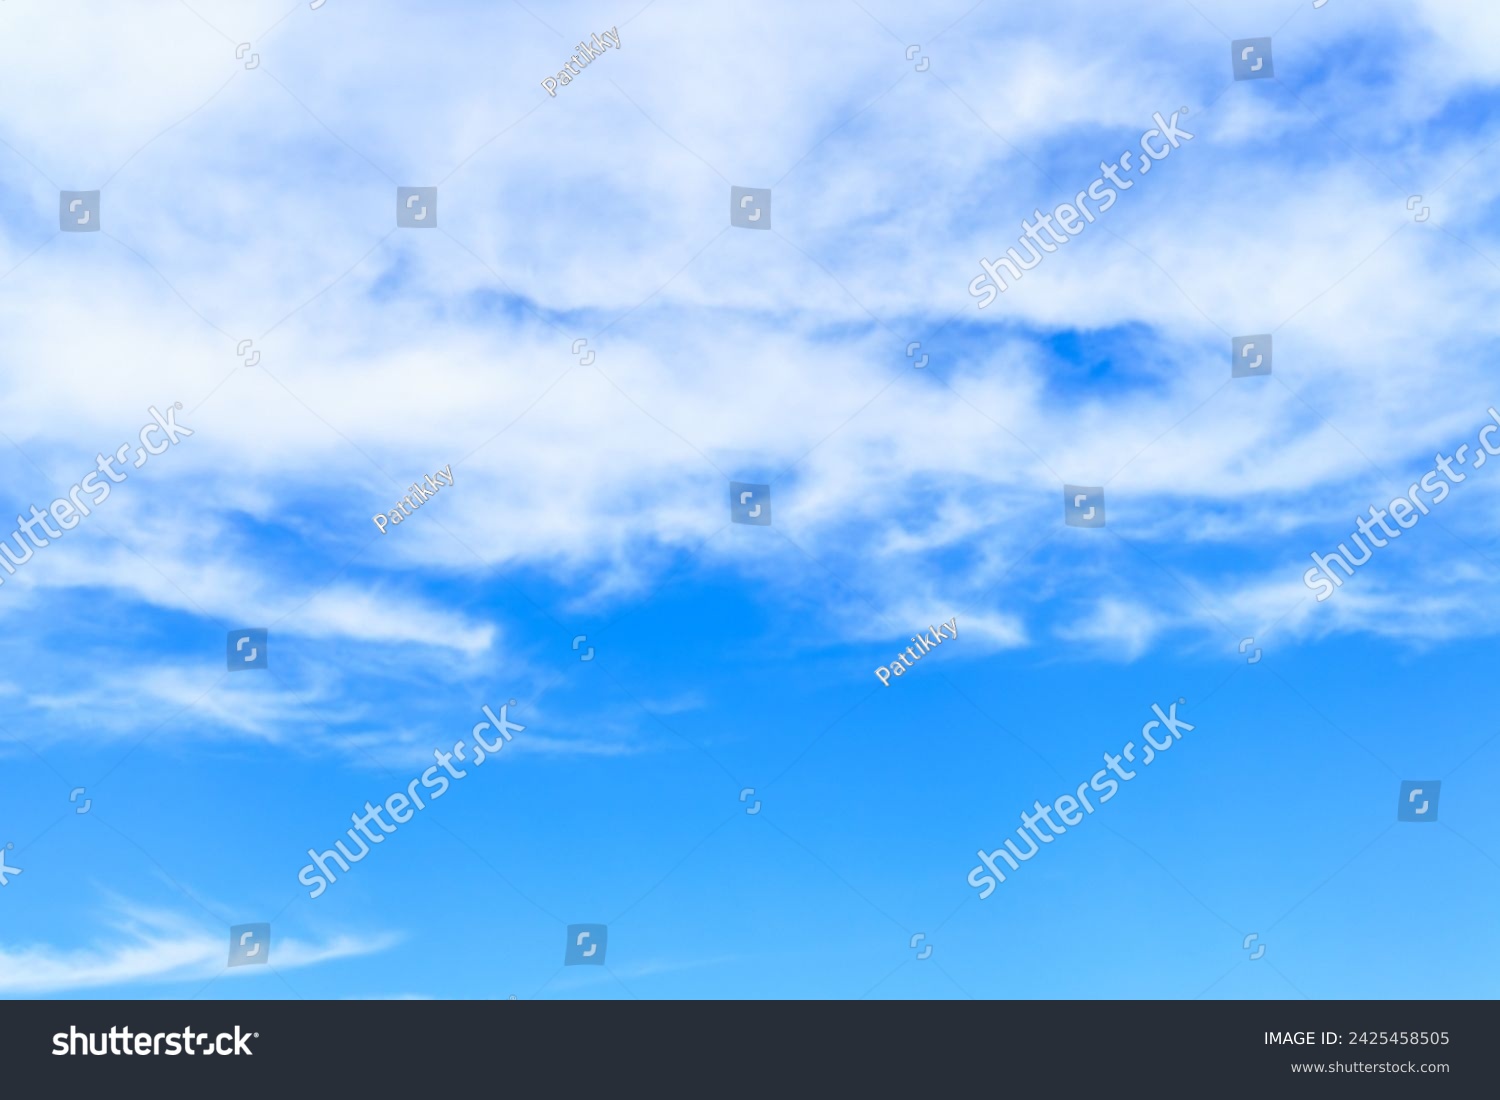 Blue sky background with white clouds, similar to fog covering mountains and waves in the sea. #2425458505